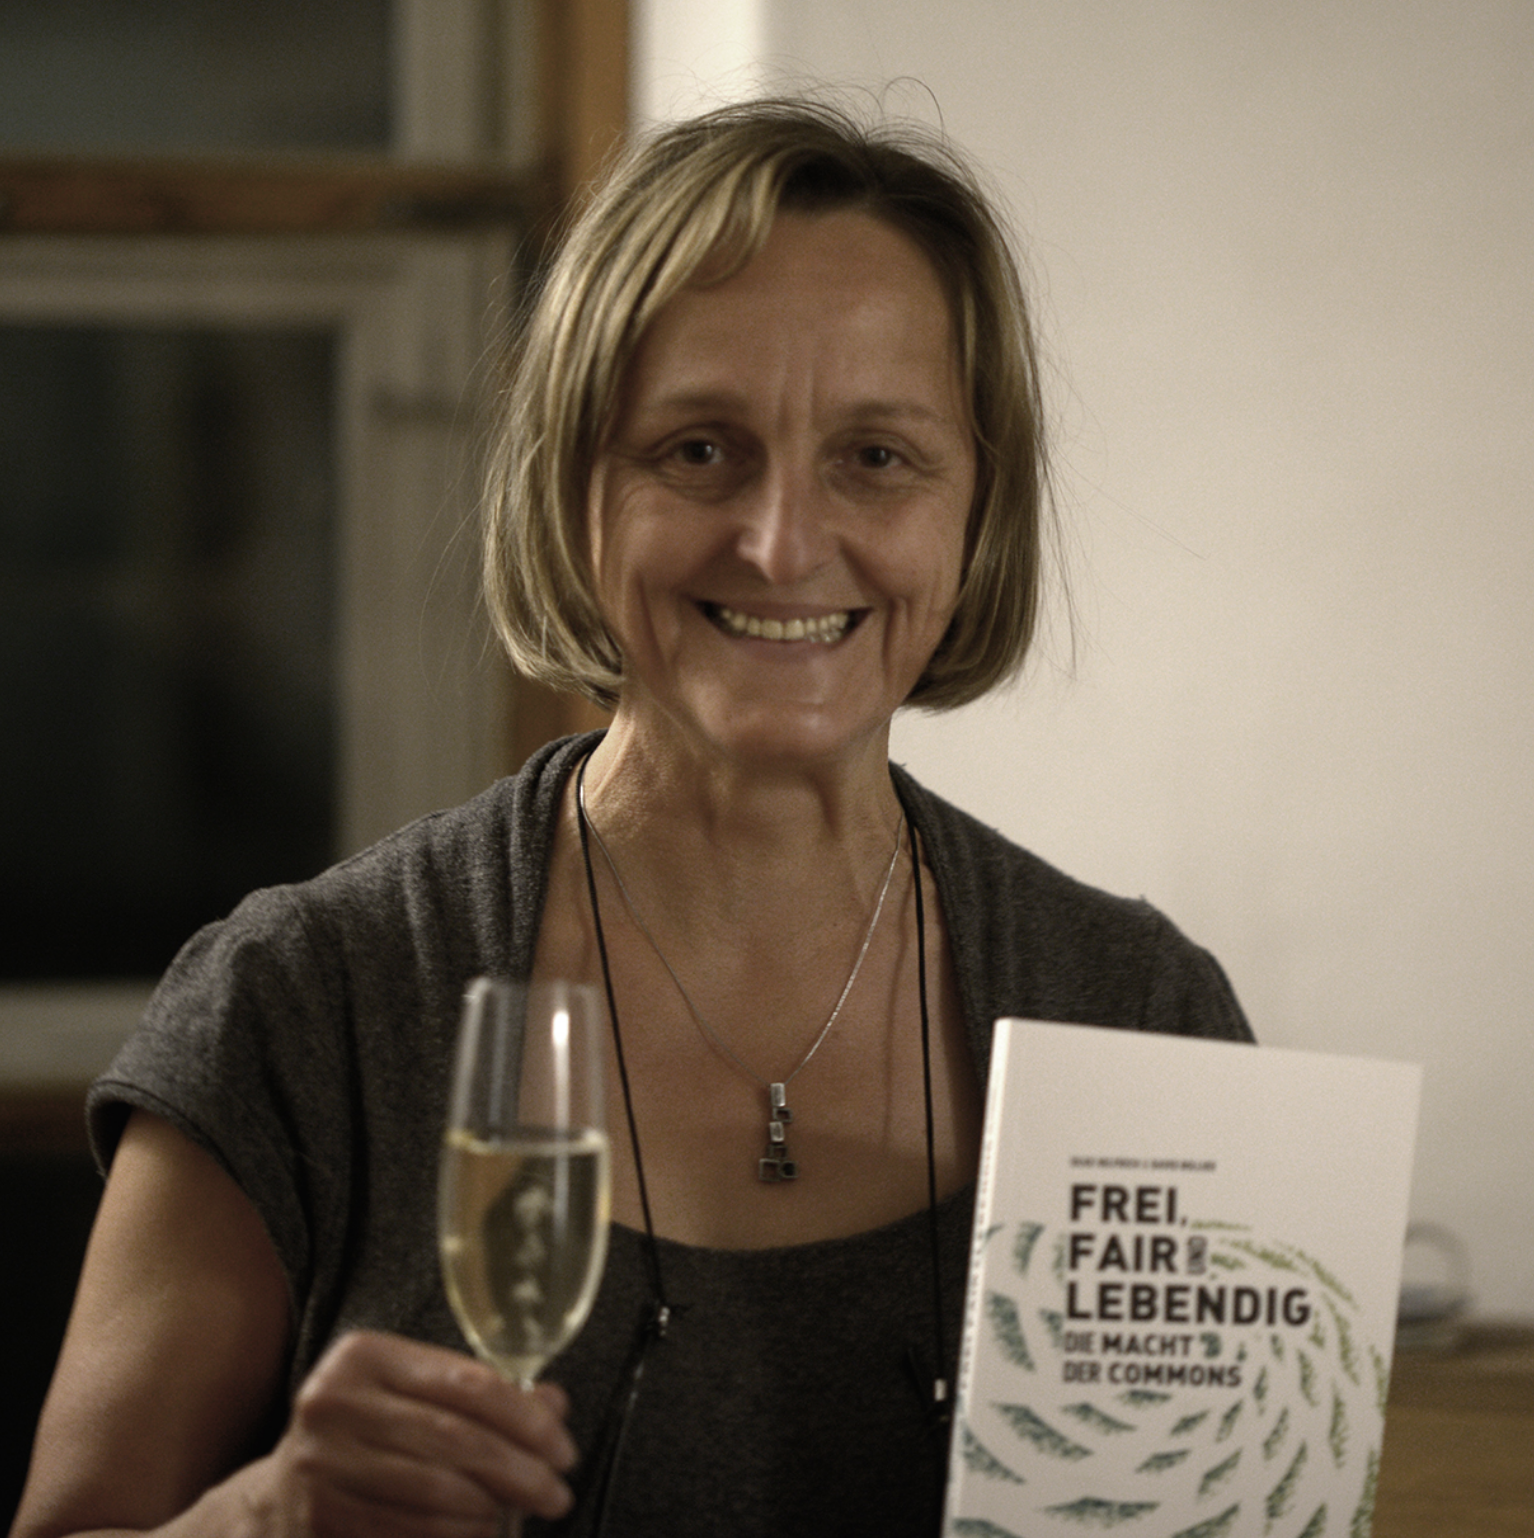 Silke Helfrich celebrating the launch of german version of Free Fair and Alive